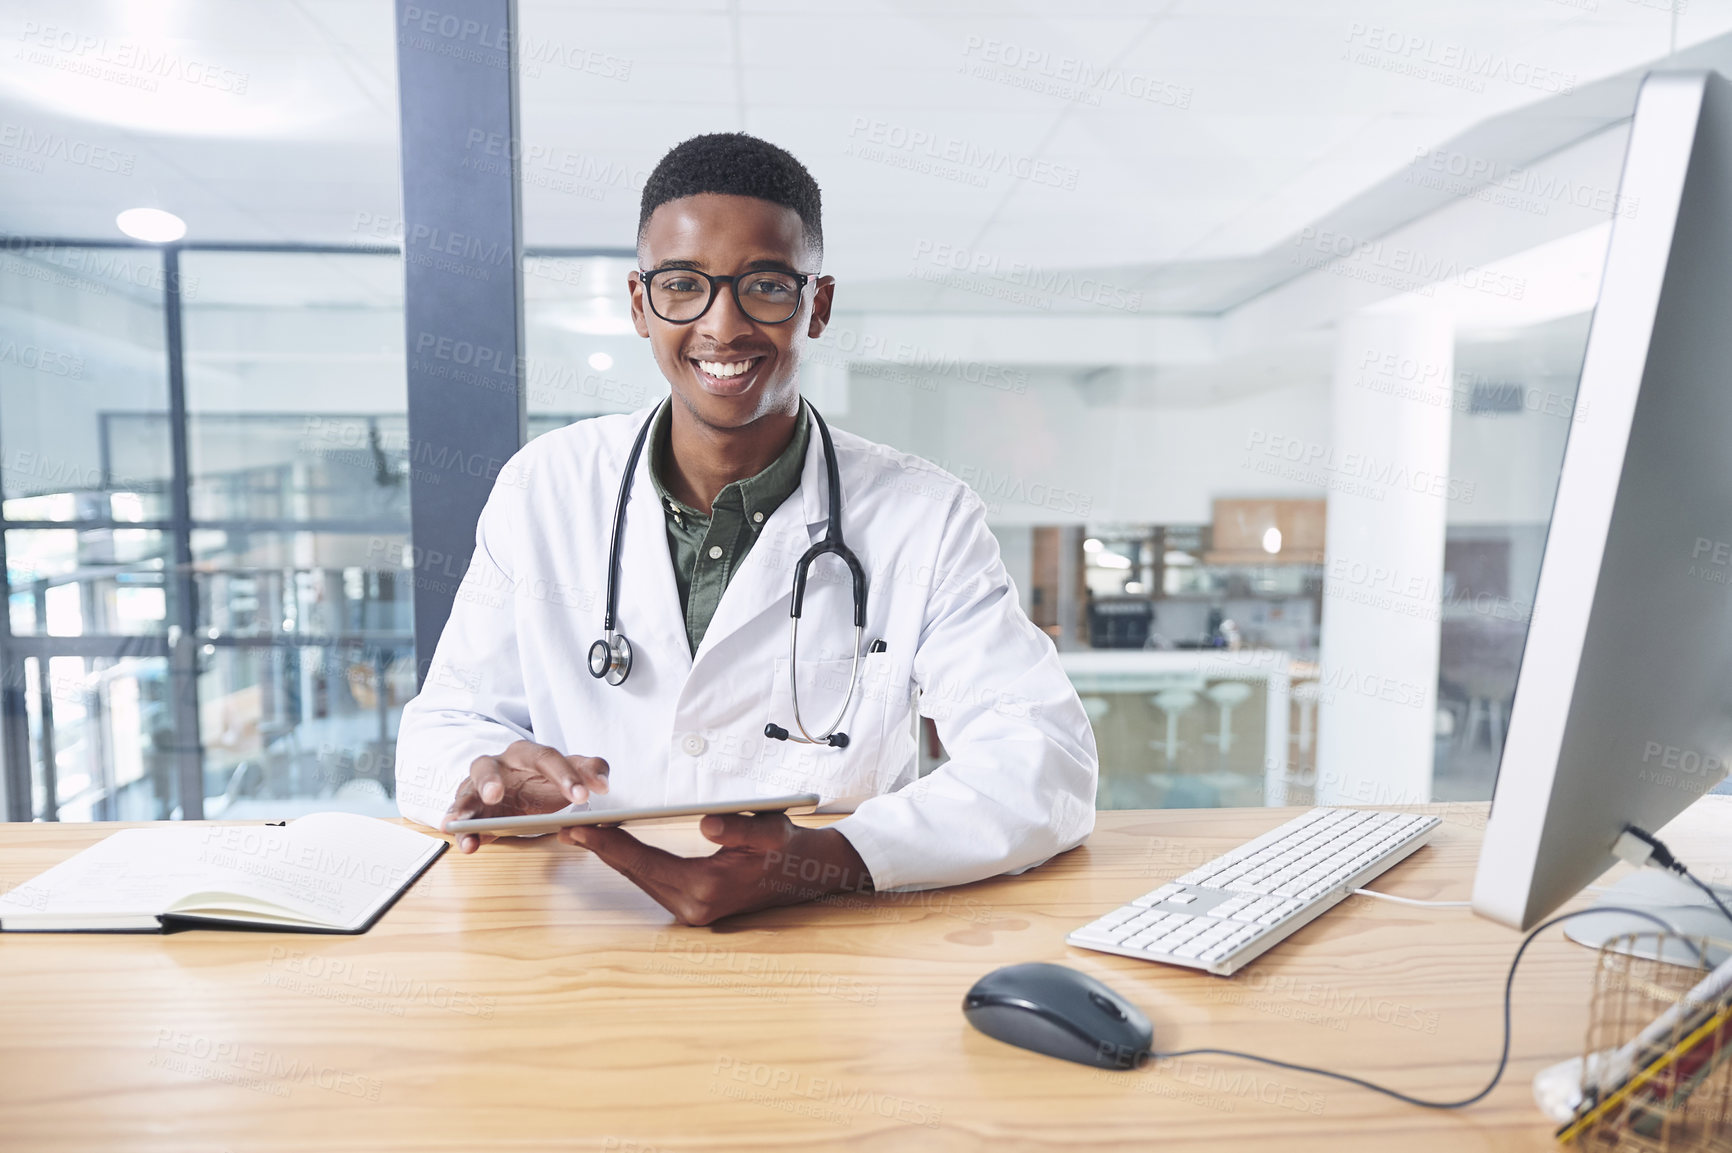 Buy stock photo Shot of a handsome young doctor sitting alone in his office at the clinic and using his digital tablet